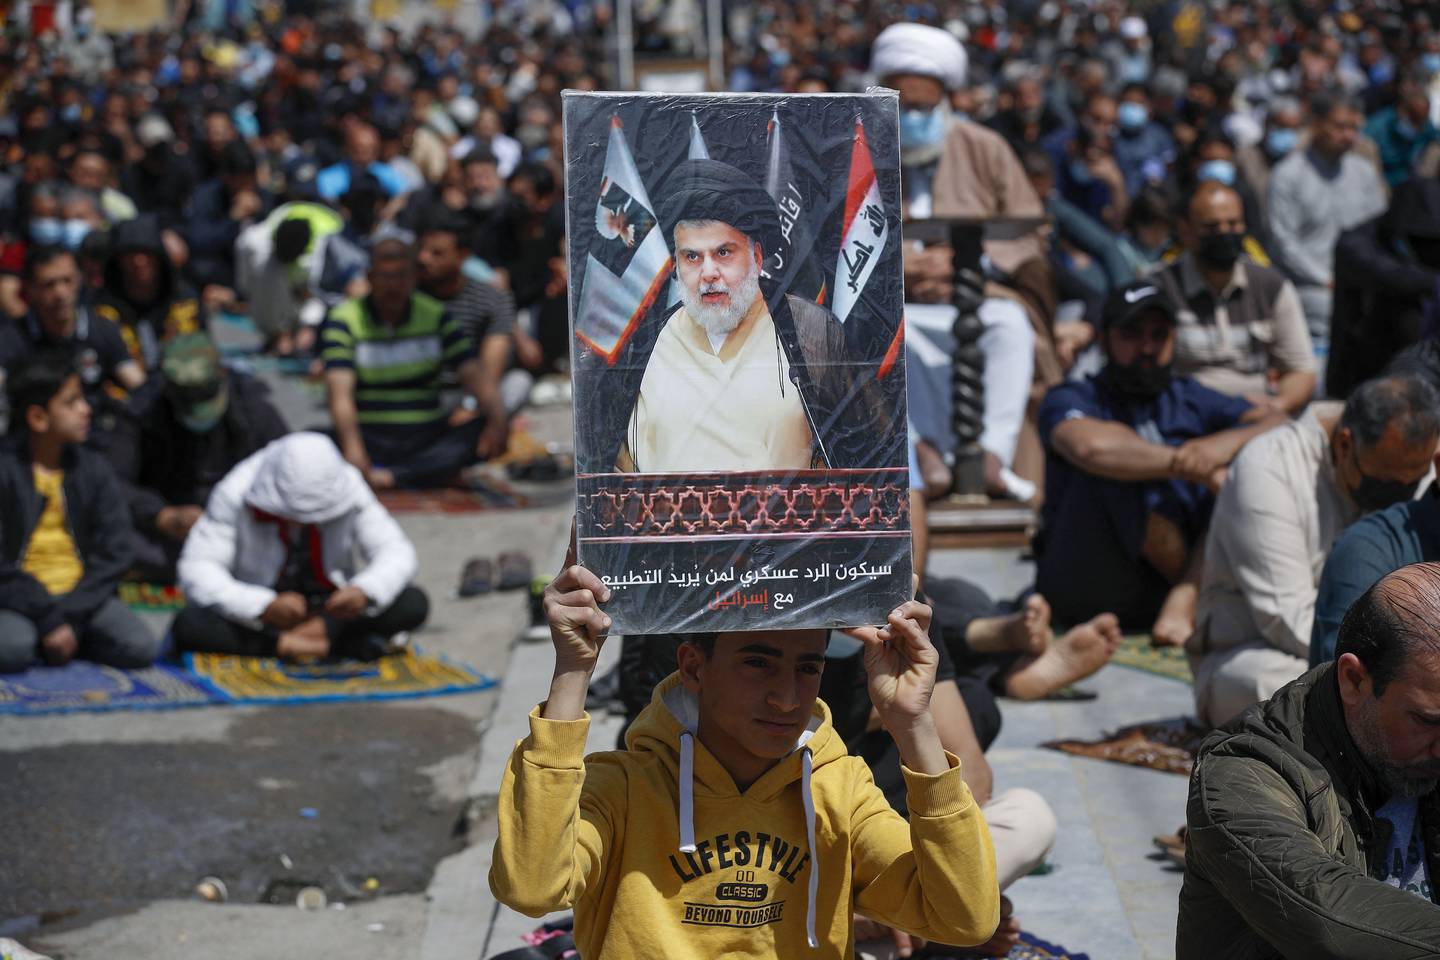 A supporter of Iraqi Shiite cleric Muqtada Al Sadr in Sadr City, east of the capital Baghdad, on March 25. AFP